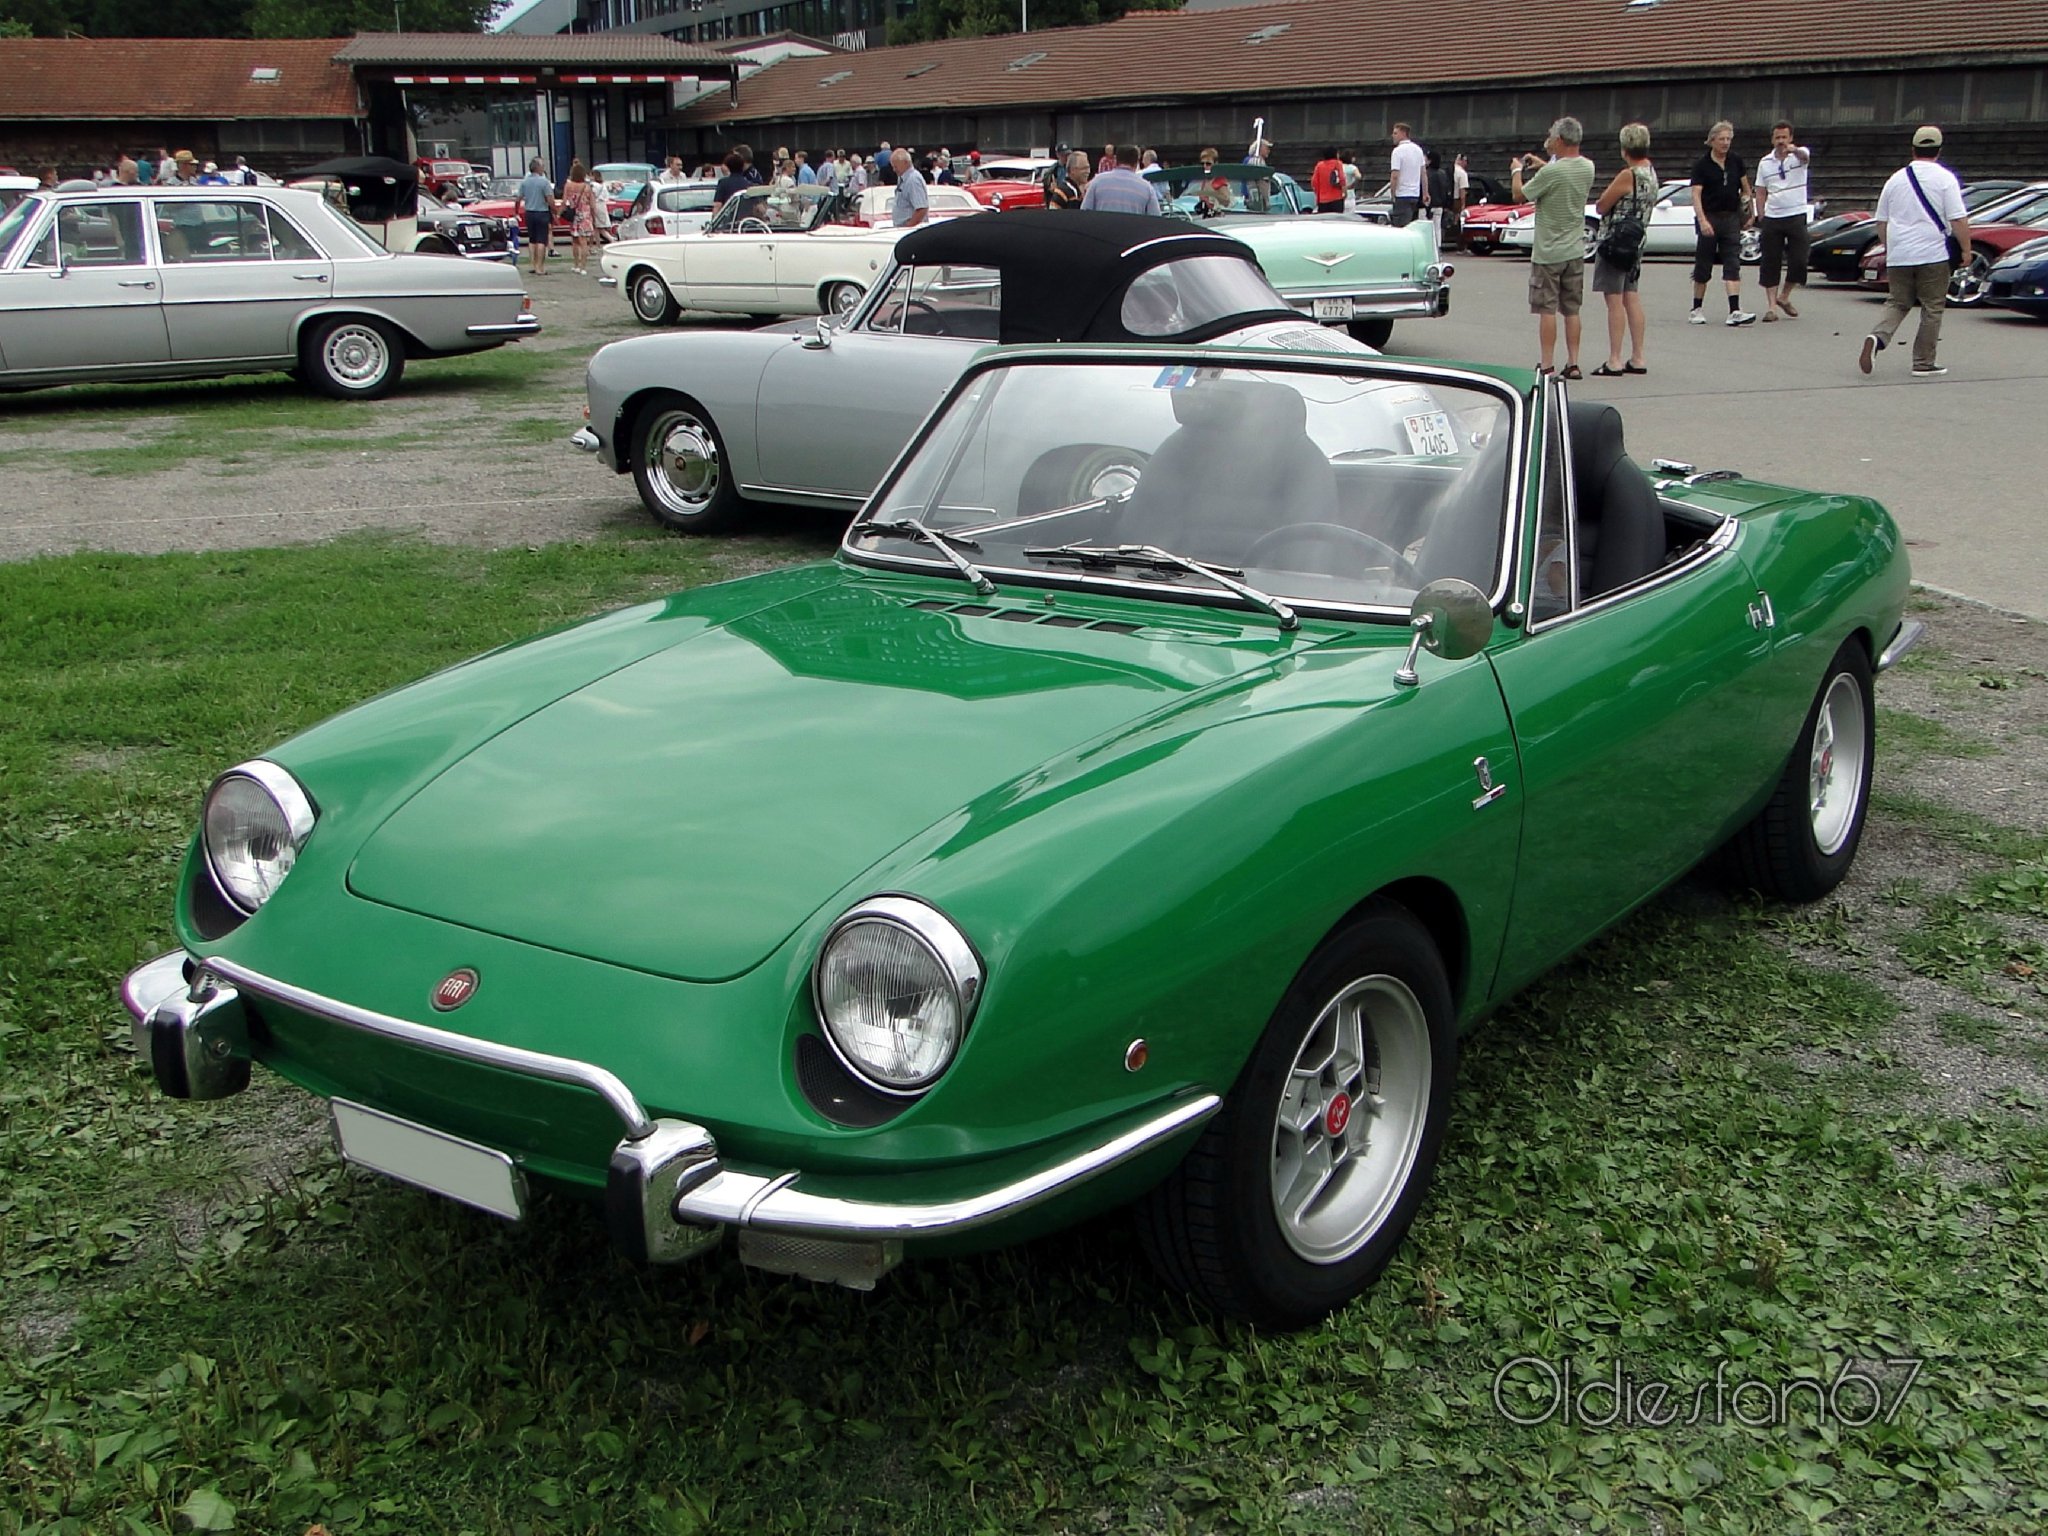 fiat, 850, Sport, Spider, Cars, Cabriolet, Convertible